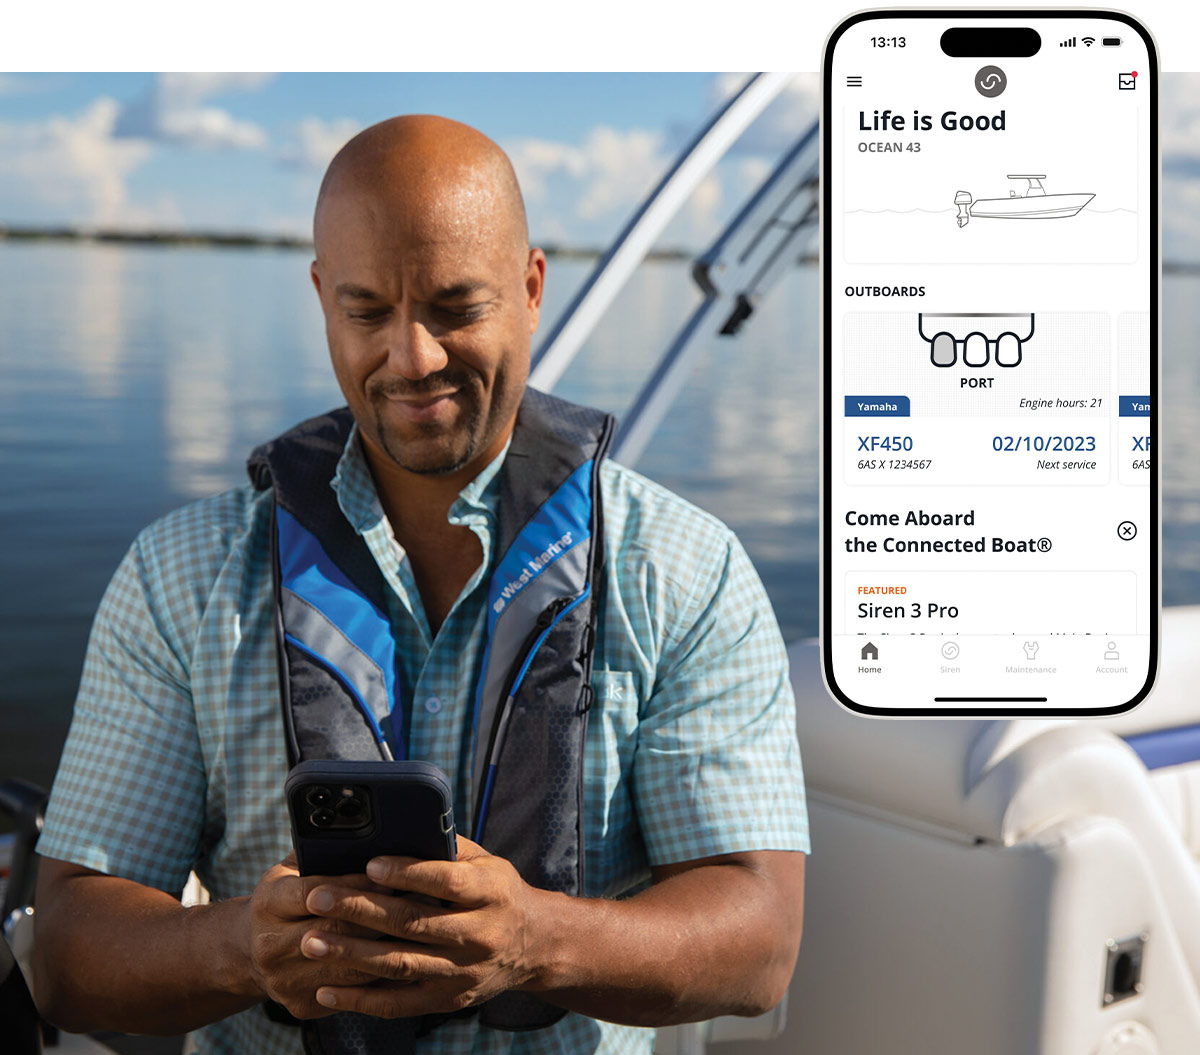 a man wearing a life preserver while on a pontoon on water smiles while looking at a smartphone; mockup of a smartphone showing the Siren Connected Boat app user interface